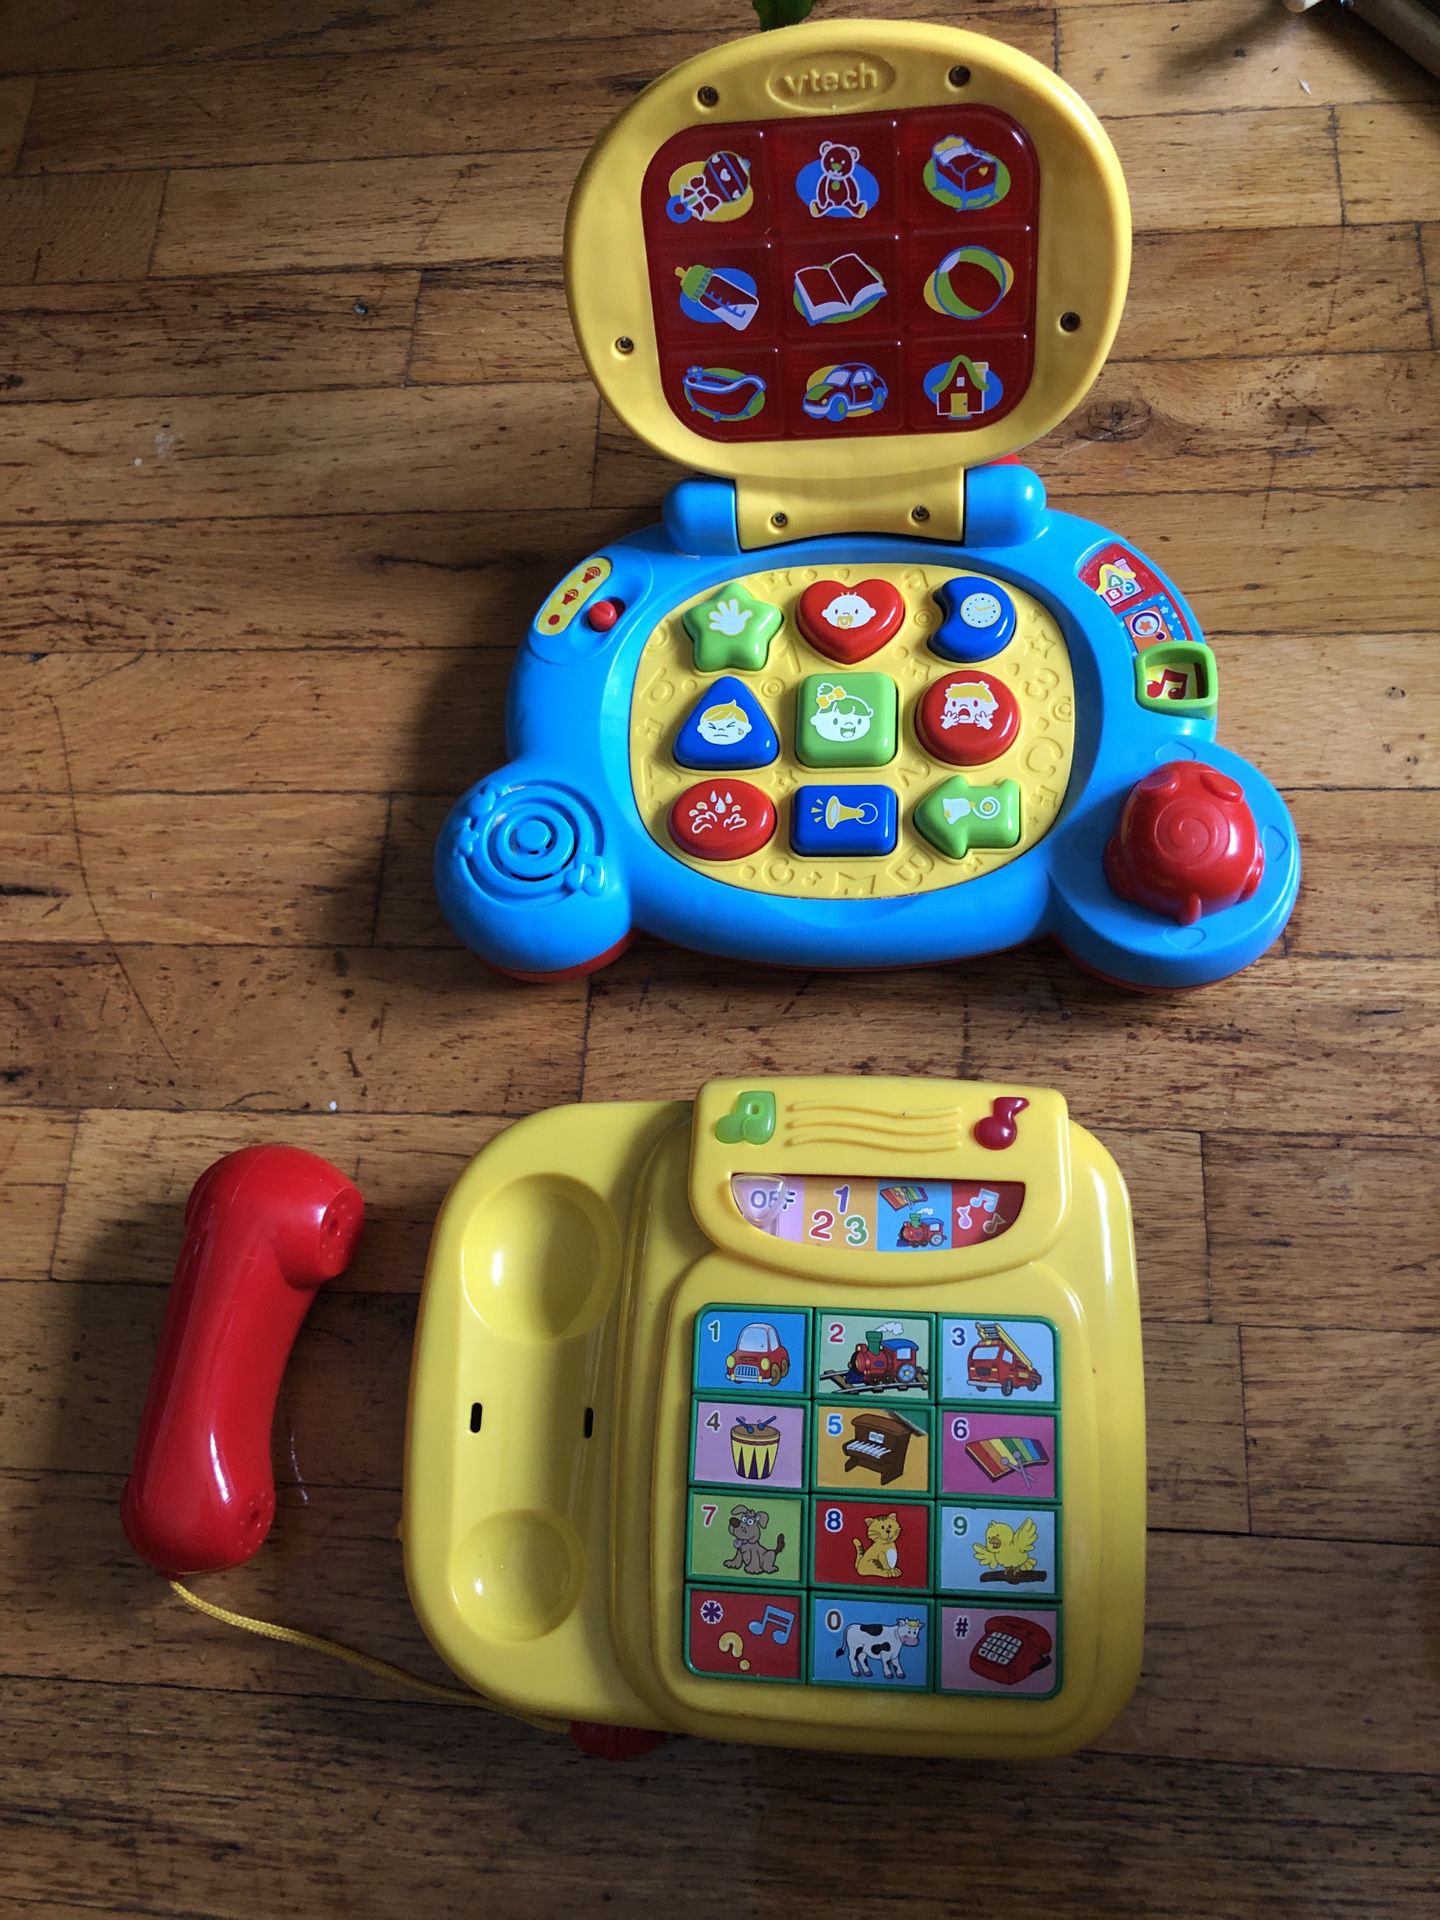 Baby And Toddler Learning Toys Phone, Laptop , Phone With Music. 